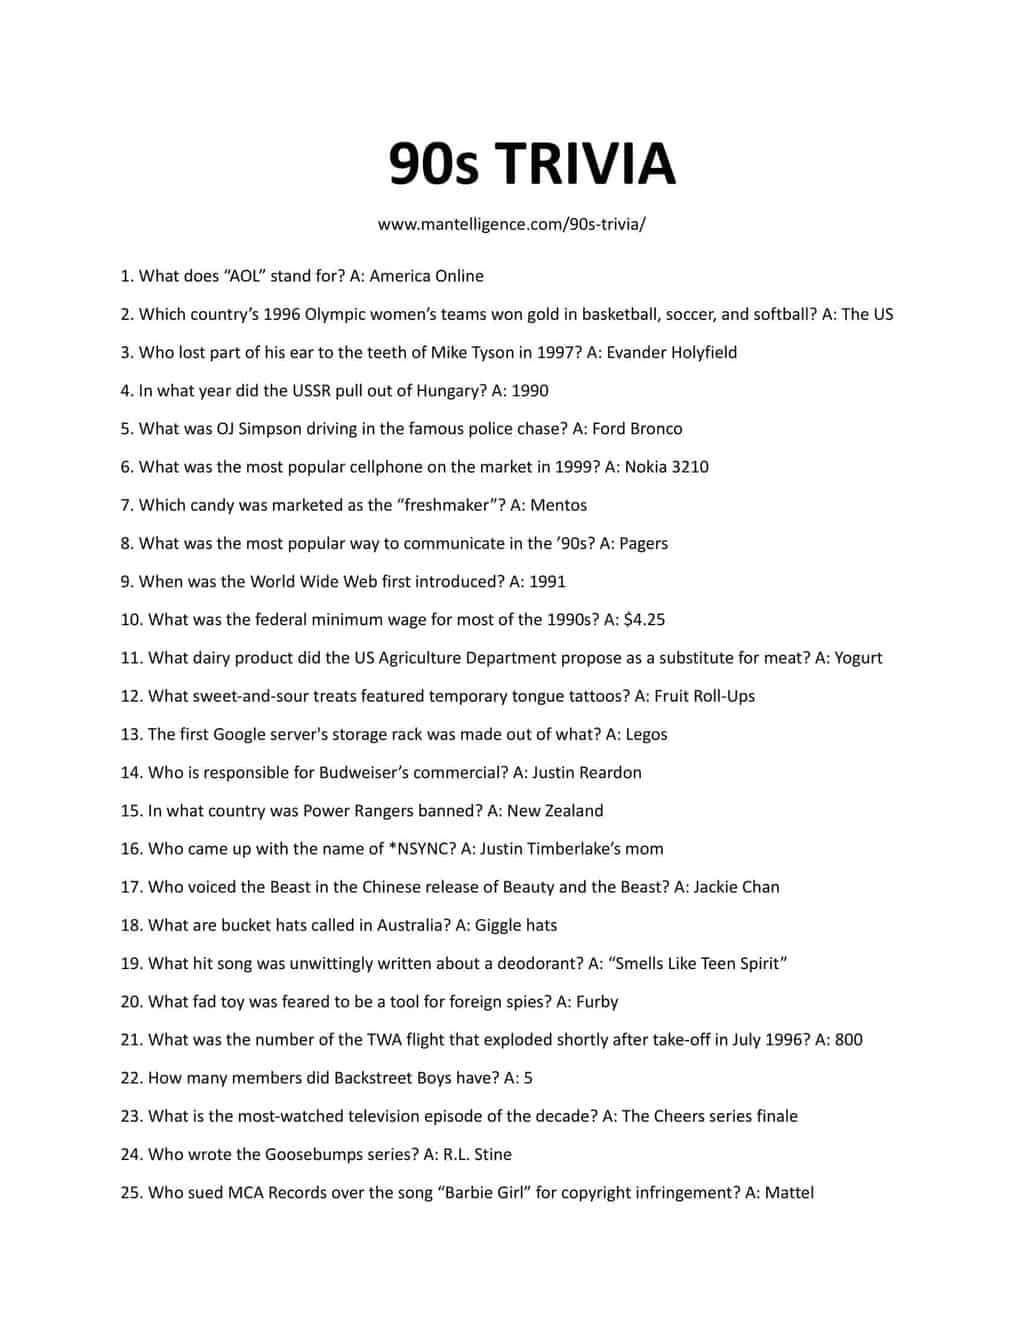 72 Best 90s Trivia Questions And Answers This Is The Only List You Ll Need